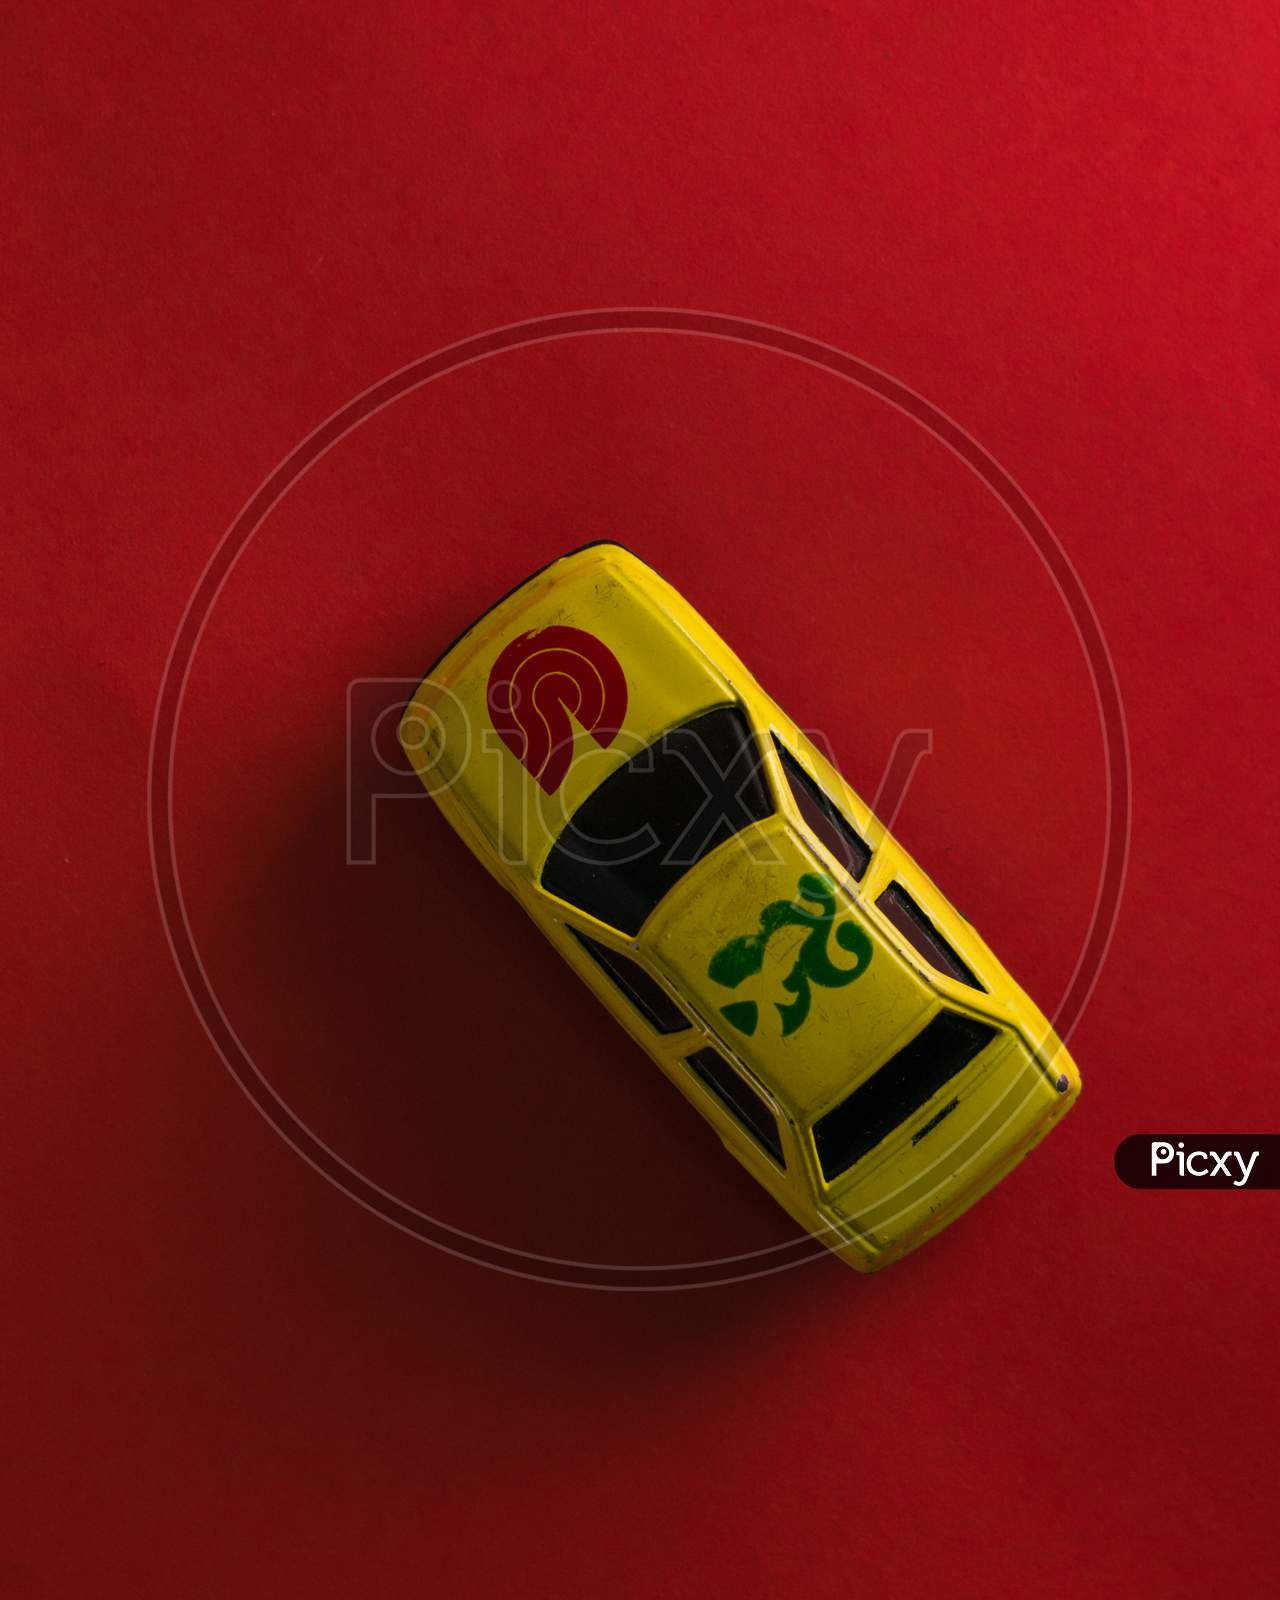 A mini yellow colour toy car on a red background